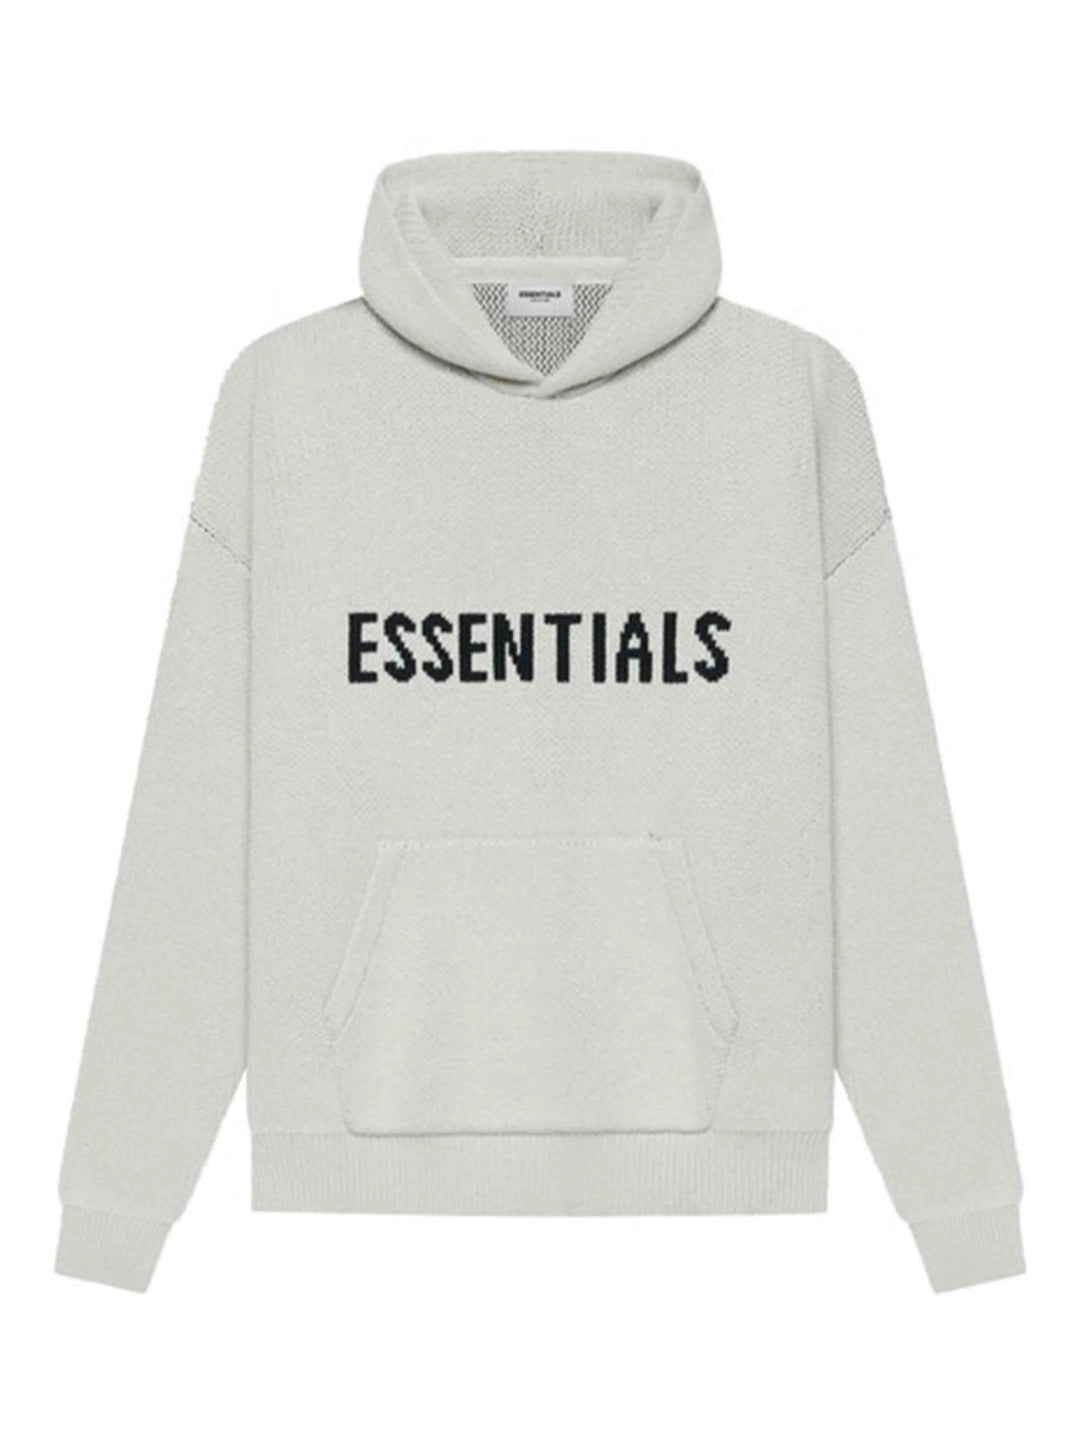 Fear Of God Essentials Knit Pullover Hoodie Light Heather Oatmeal [SS21] Prior